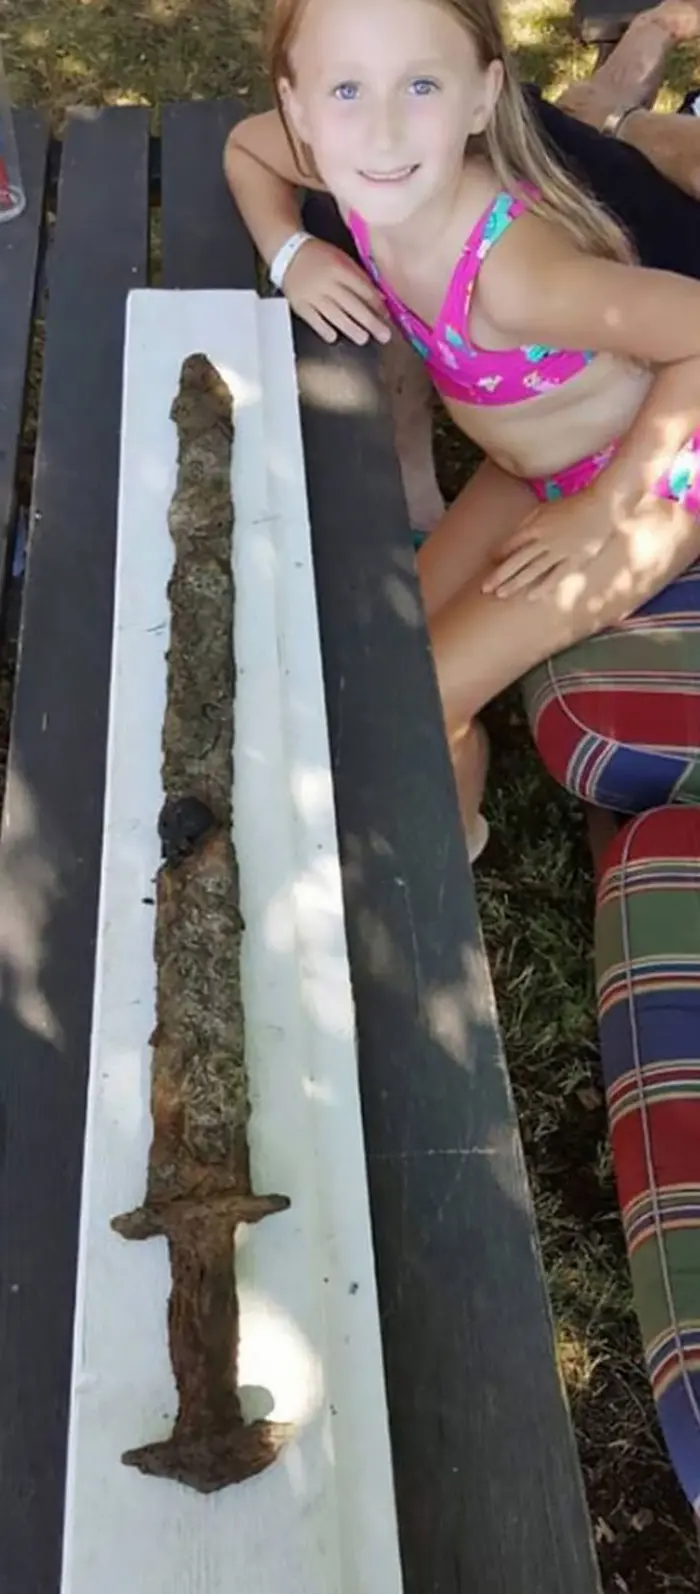 strange things discovery girl found ancient sword